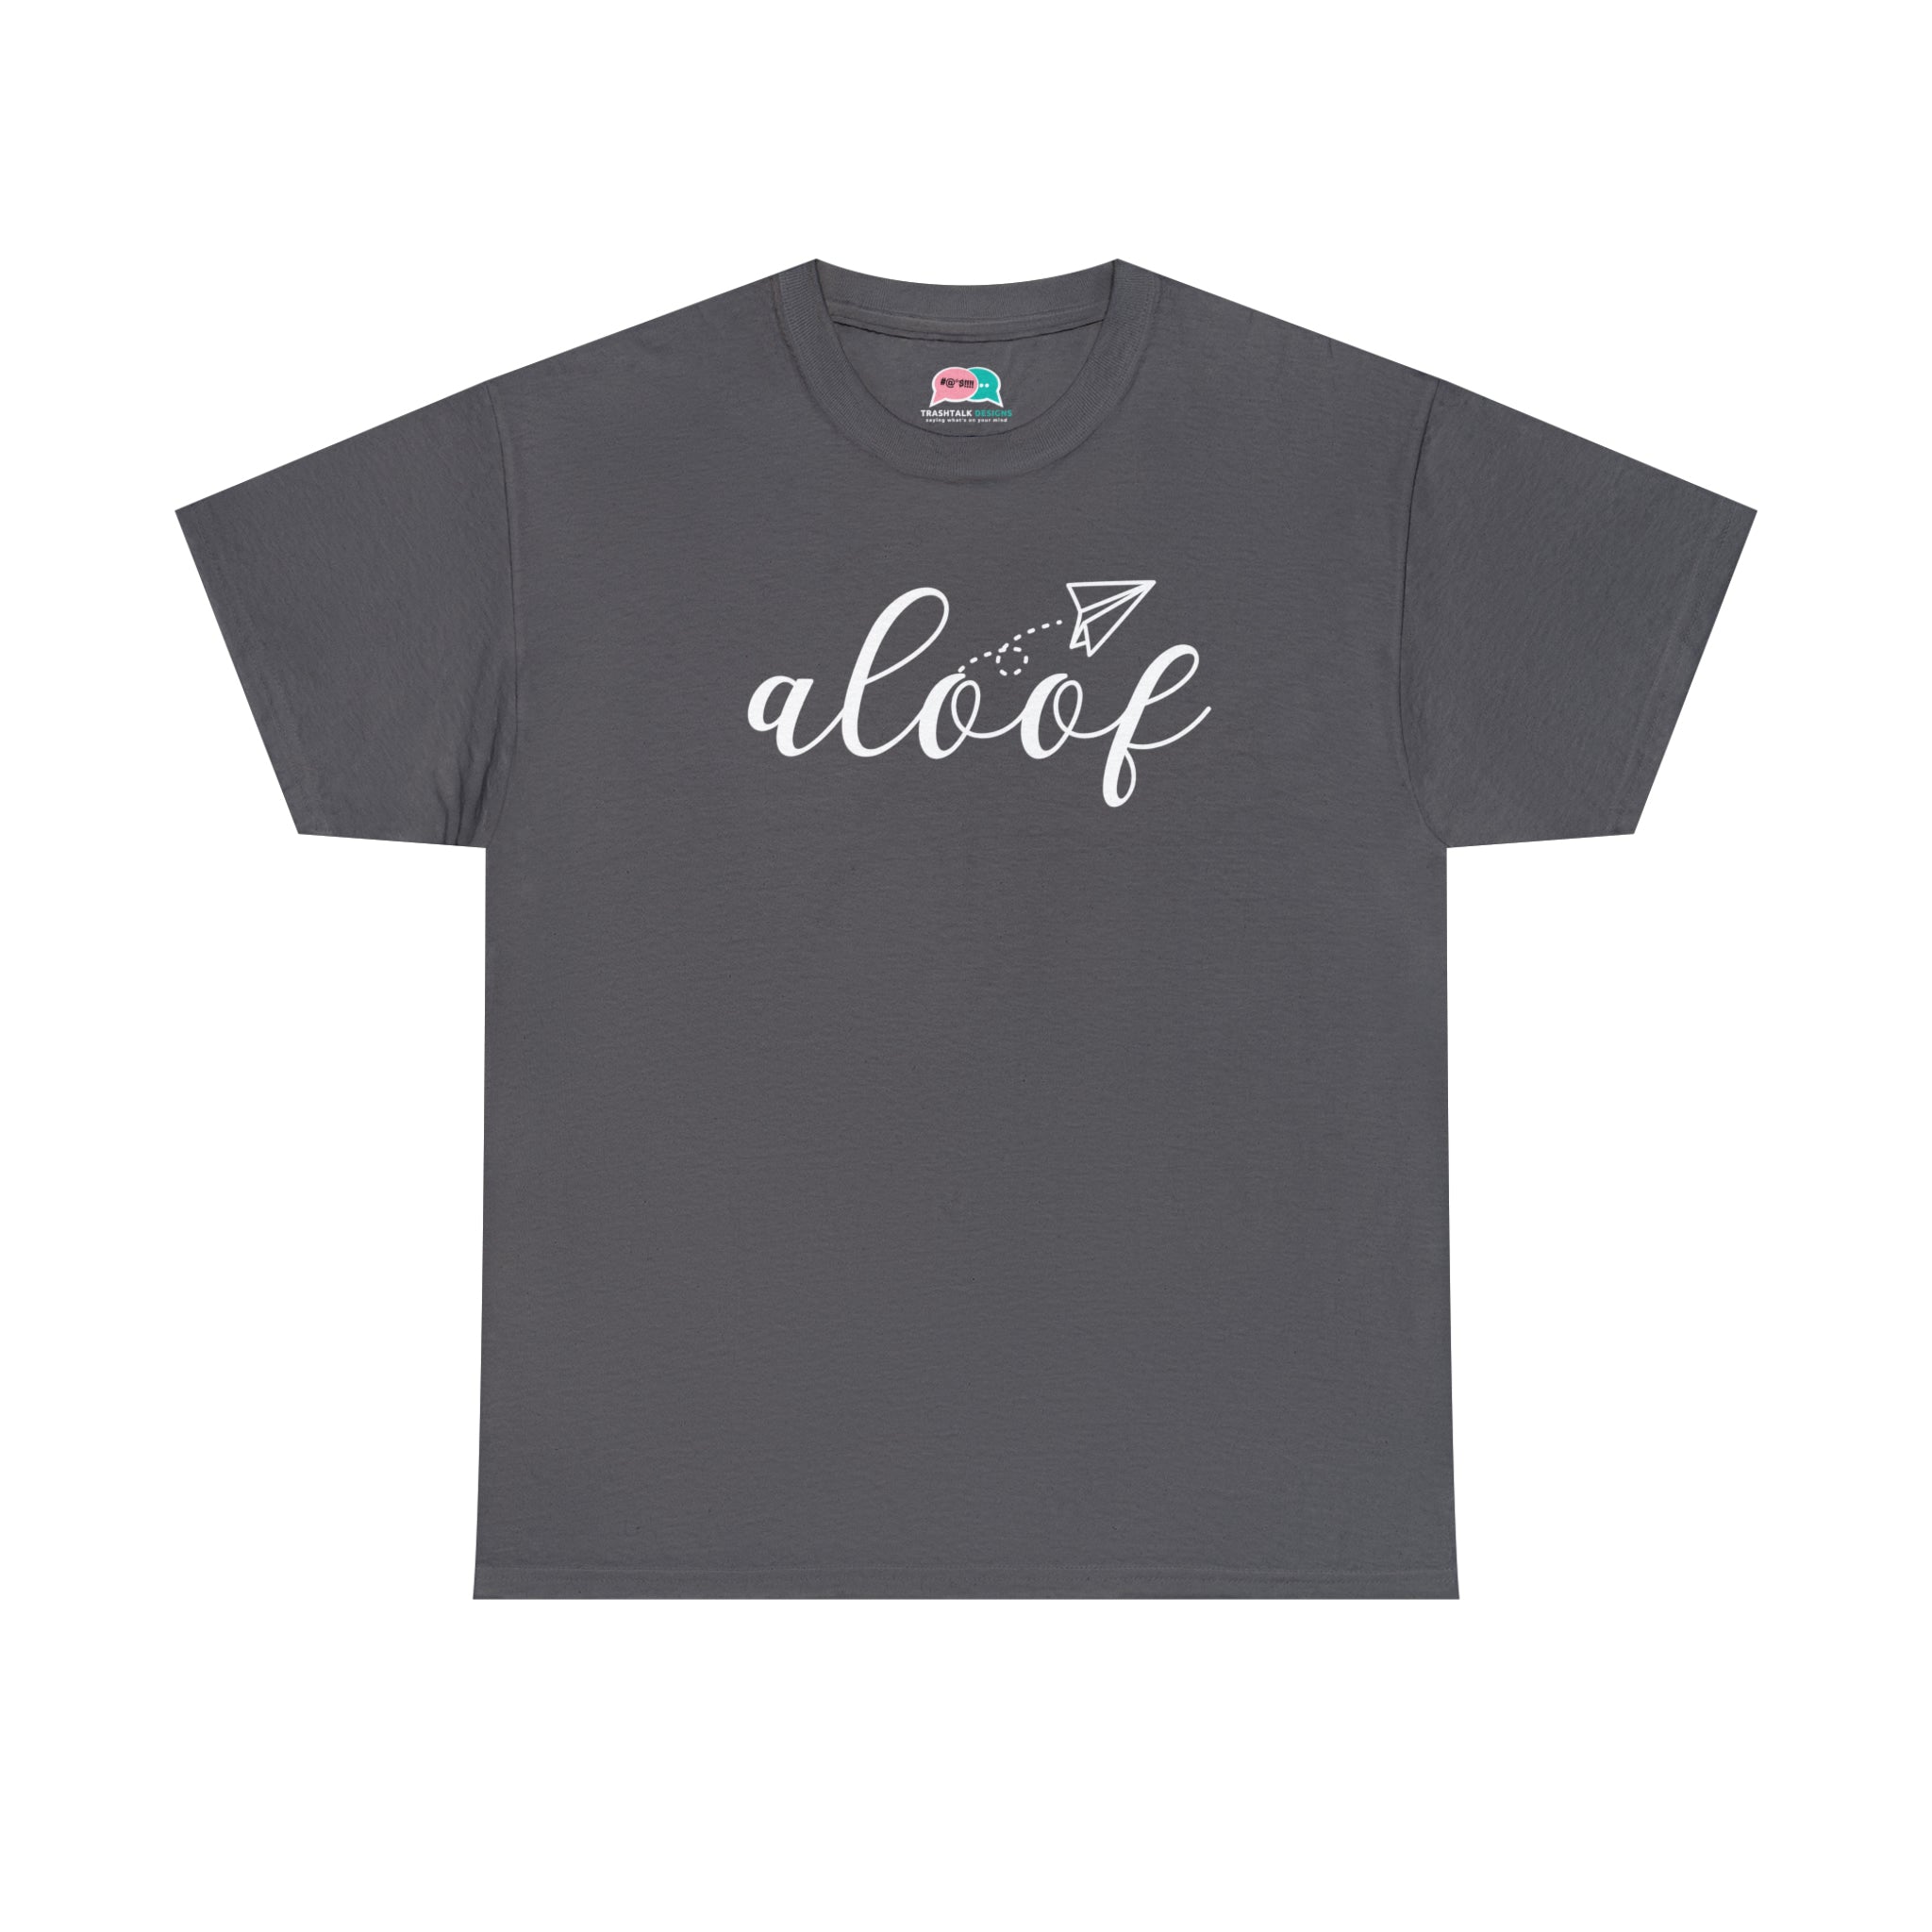  ALOOF Relaxed Fit Organic Relaxed-Fit Classic T-Shirt T-ShirtCharcoal5XL